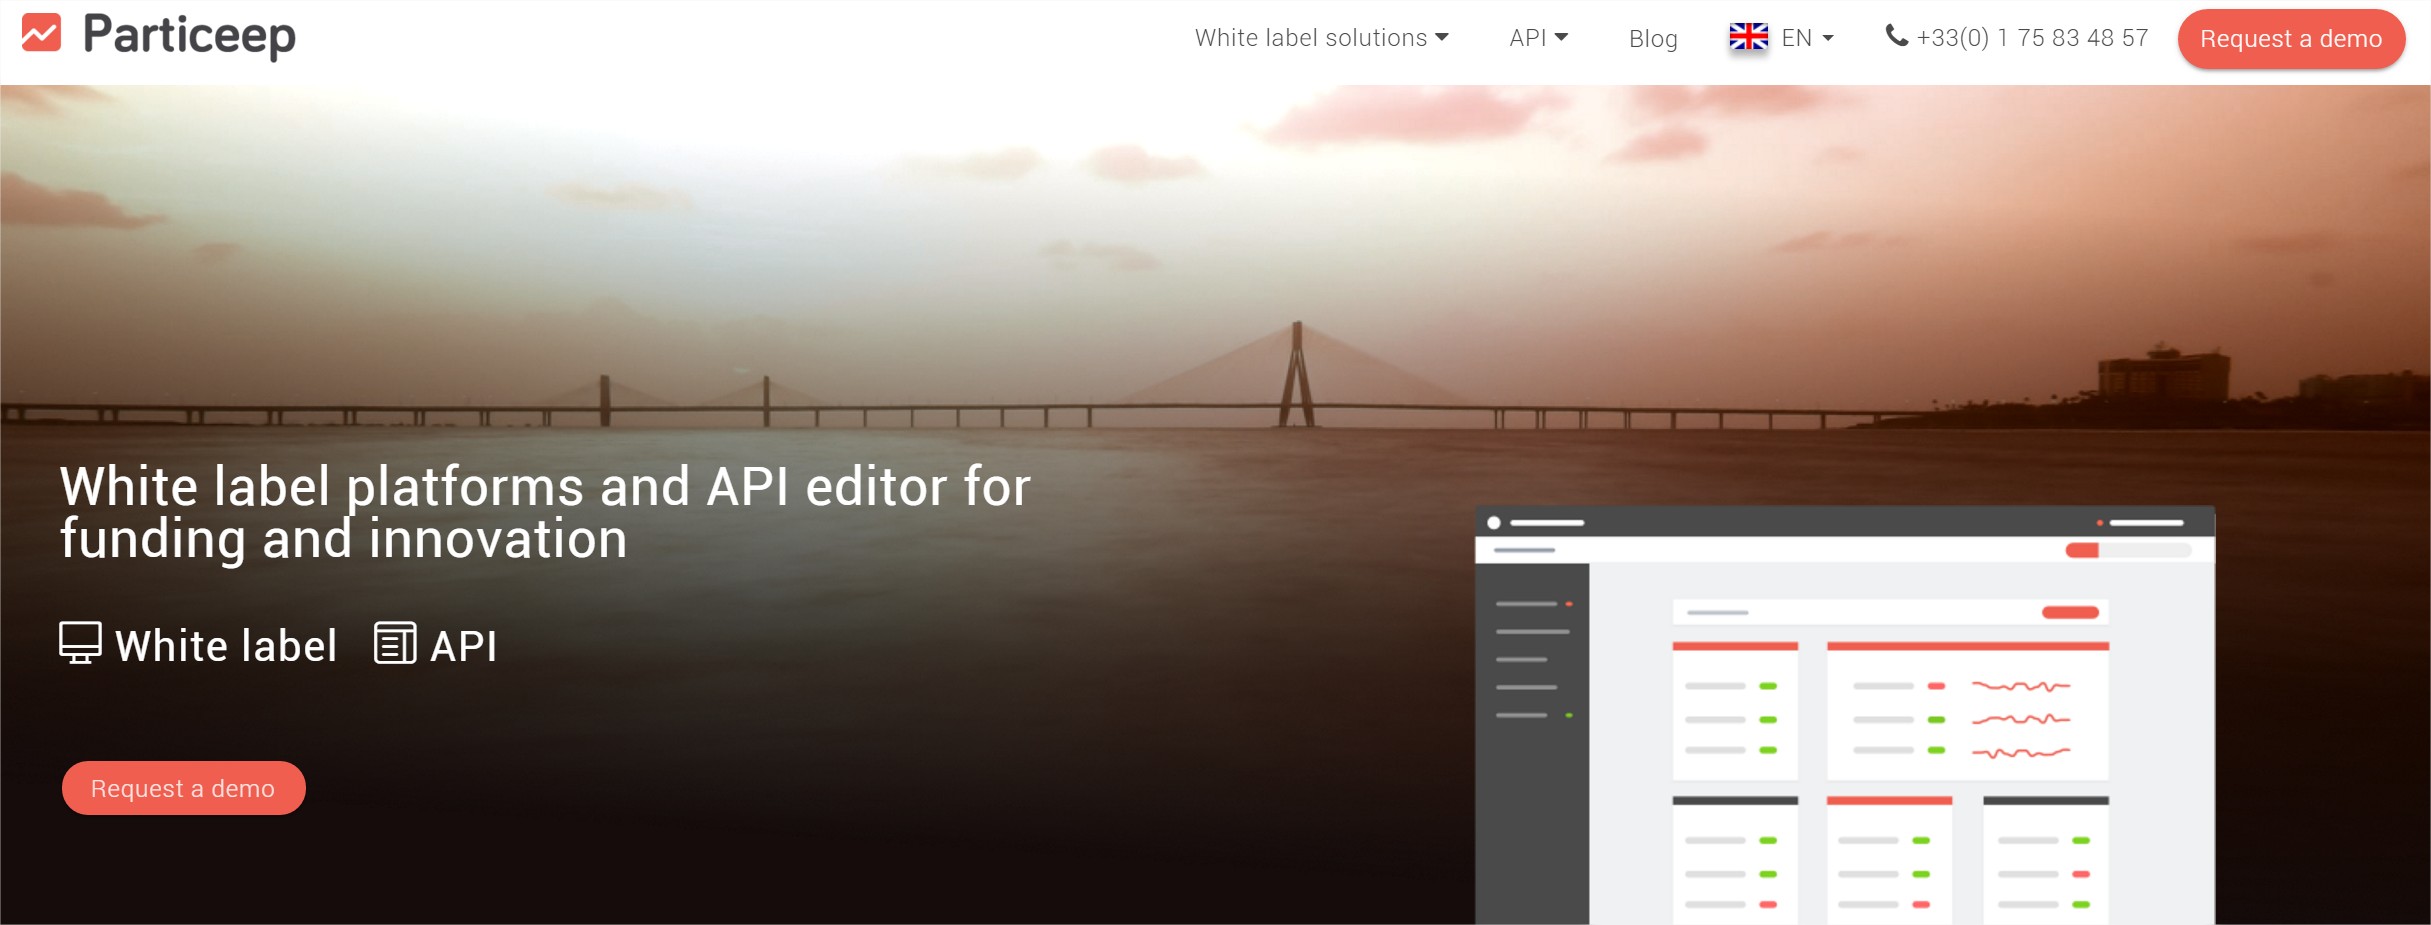 White label platforms and API editor for funding and innovation - Google Chrome